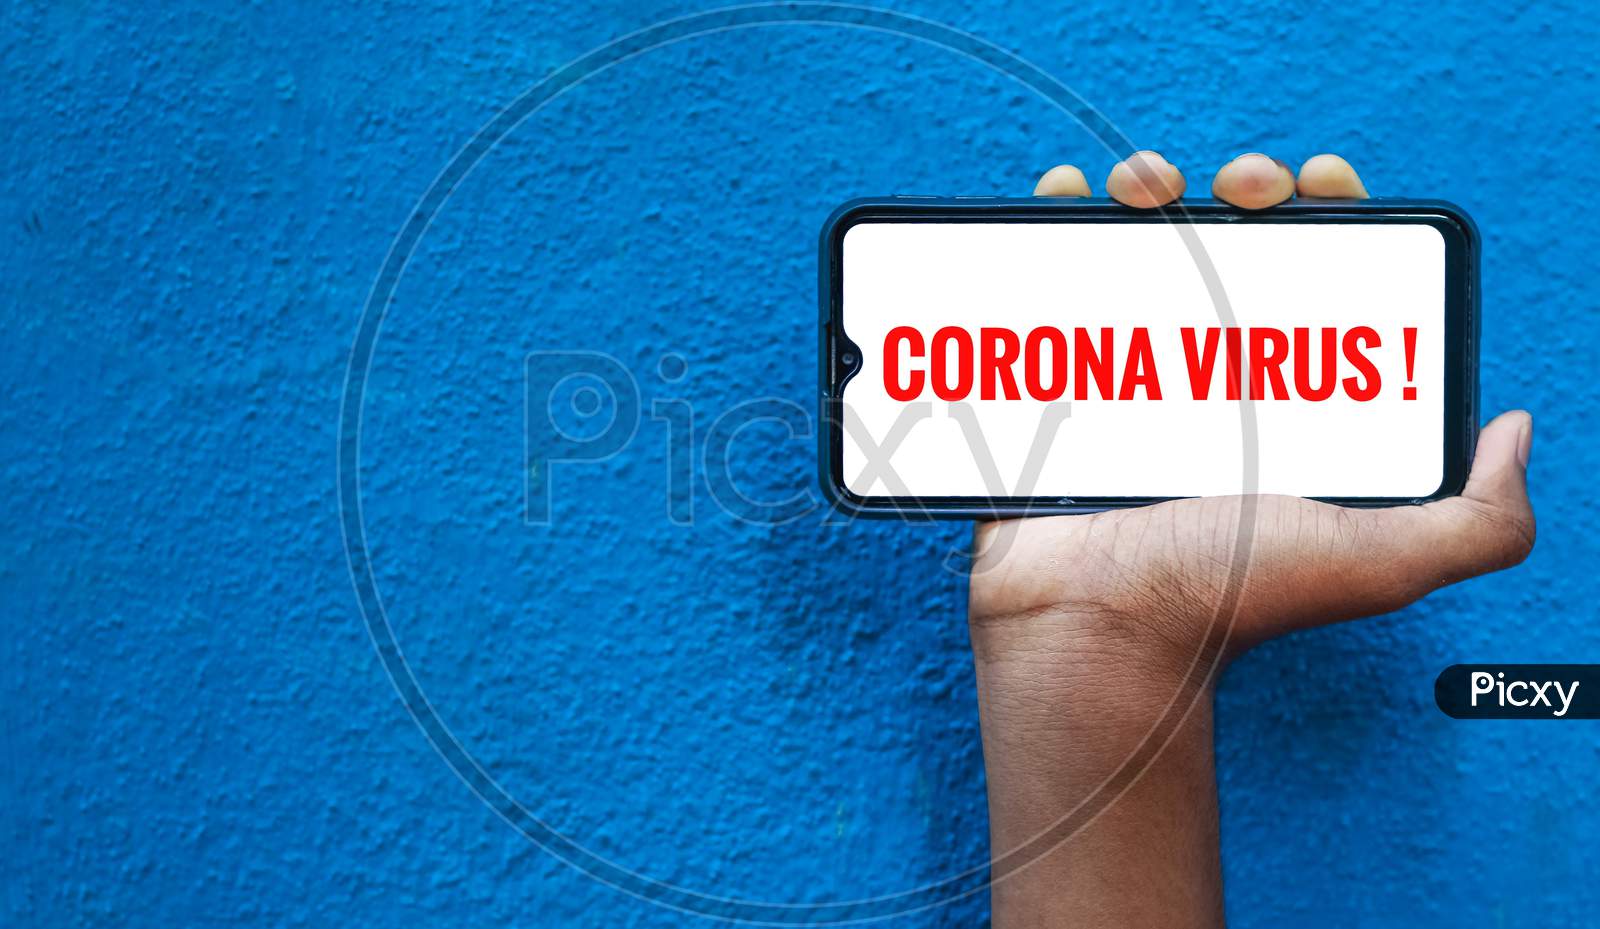 Corona Virus / Covid-19 Wording On Smart Phone Screen Isolated On Blue Background With Copy Space For Text. Person Holding Mobile On His Hand And Showing Front Of The Screen For Corona Virus Wording.